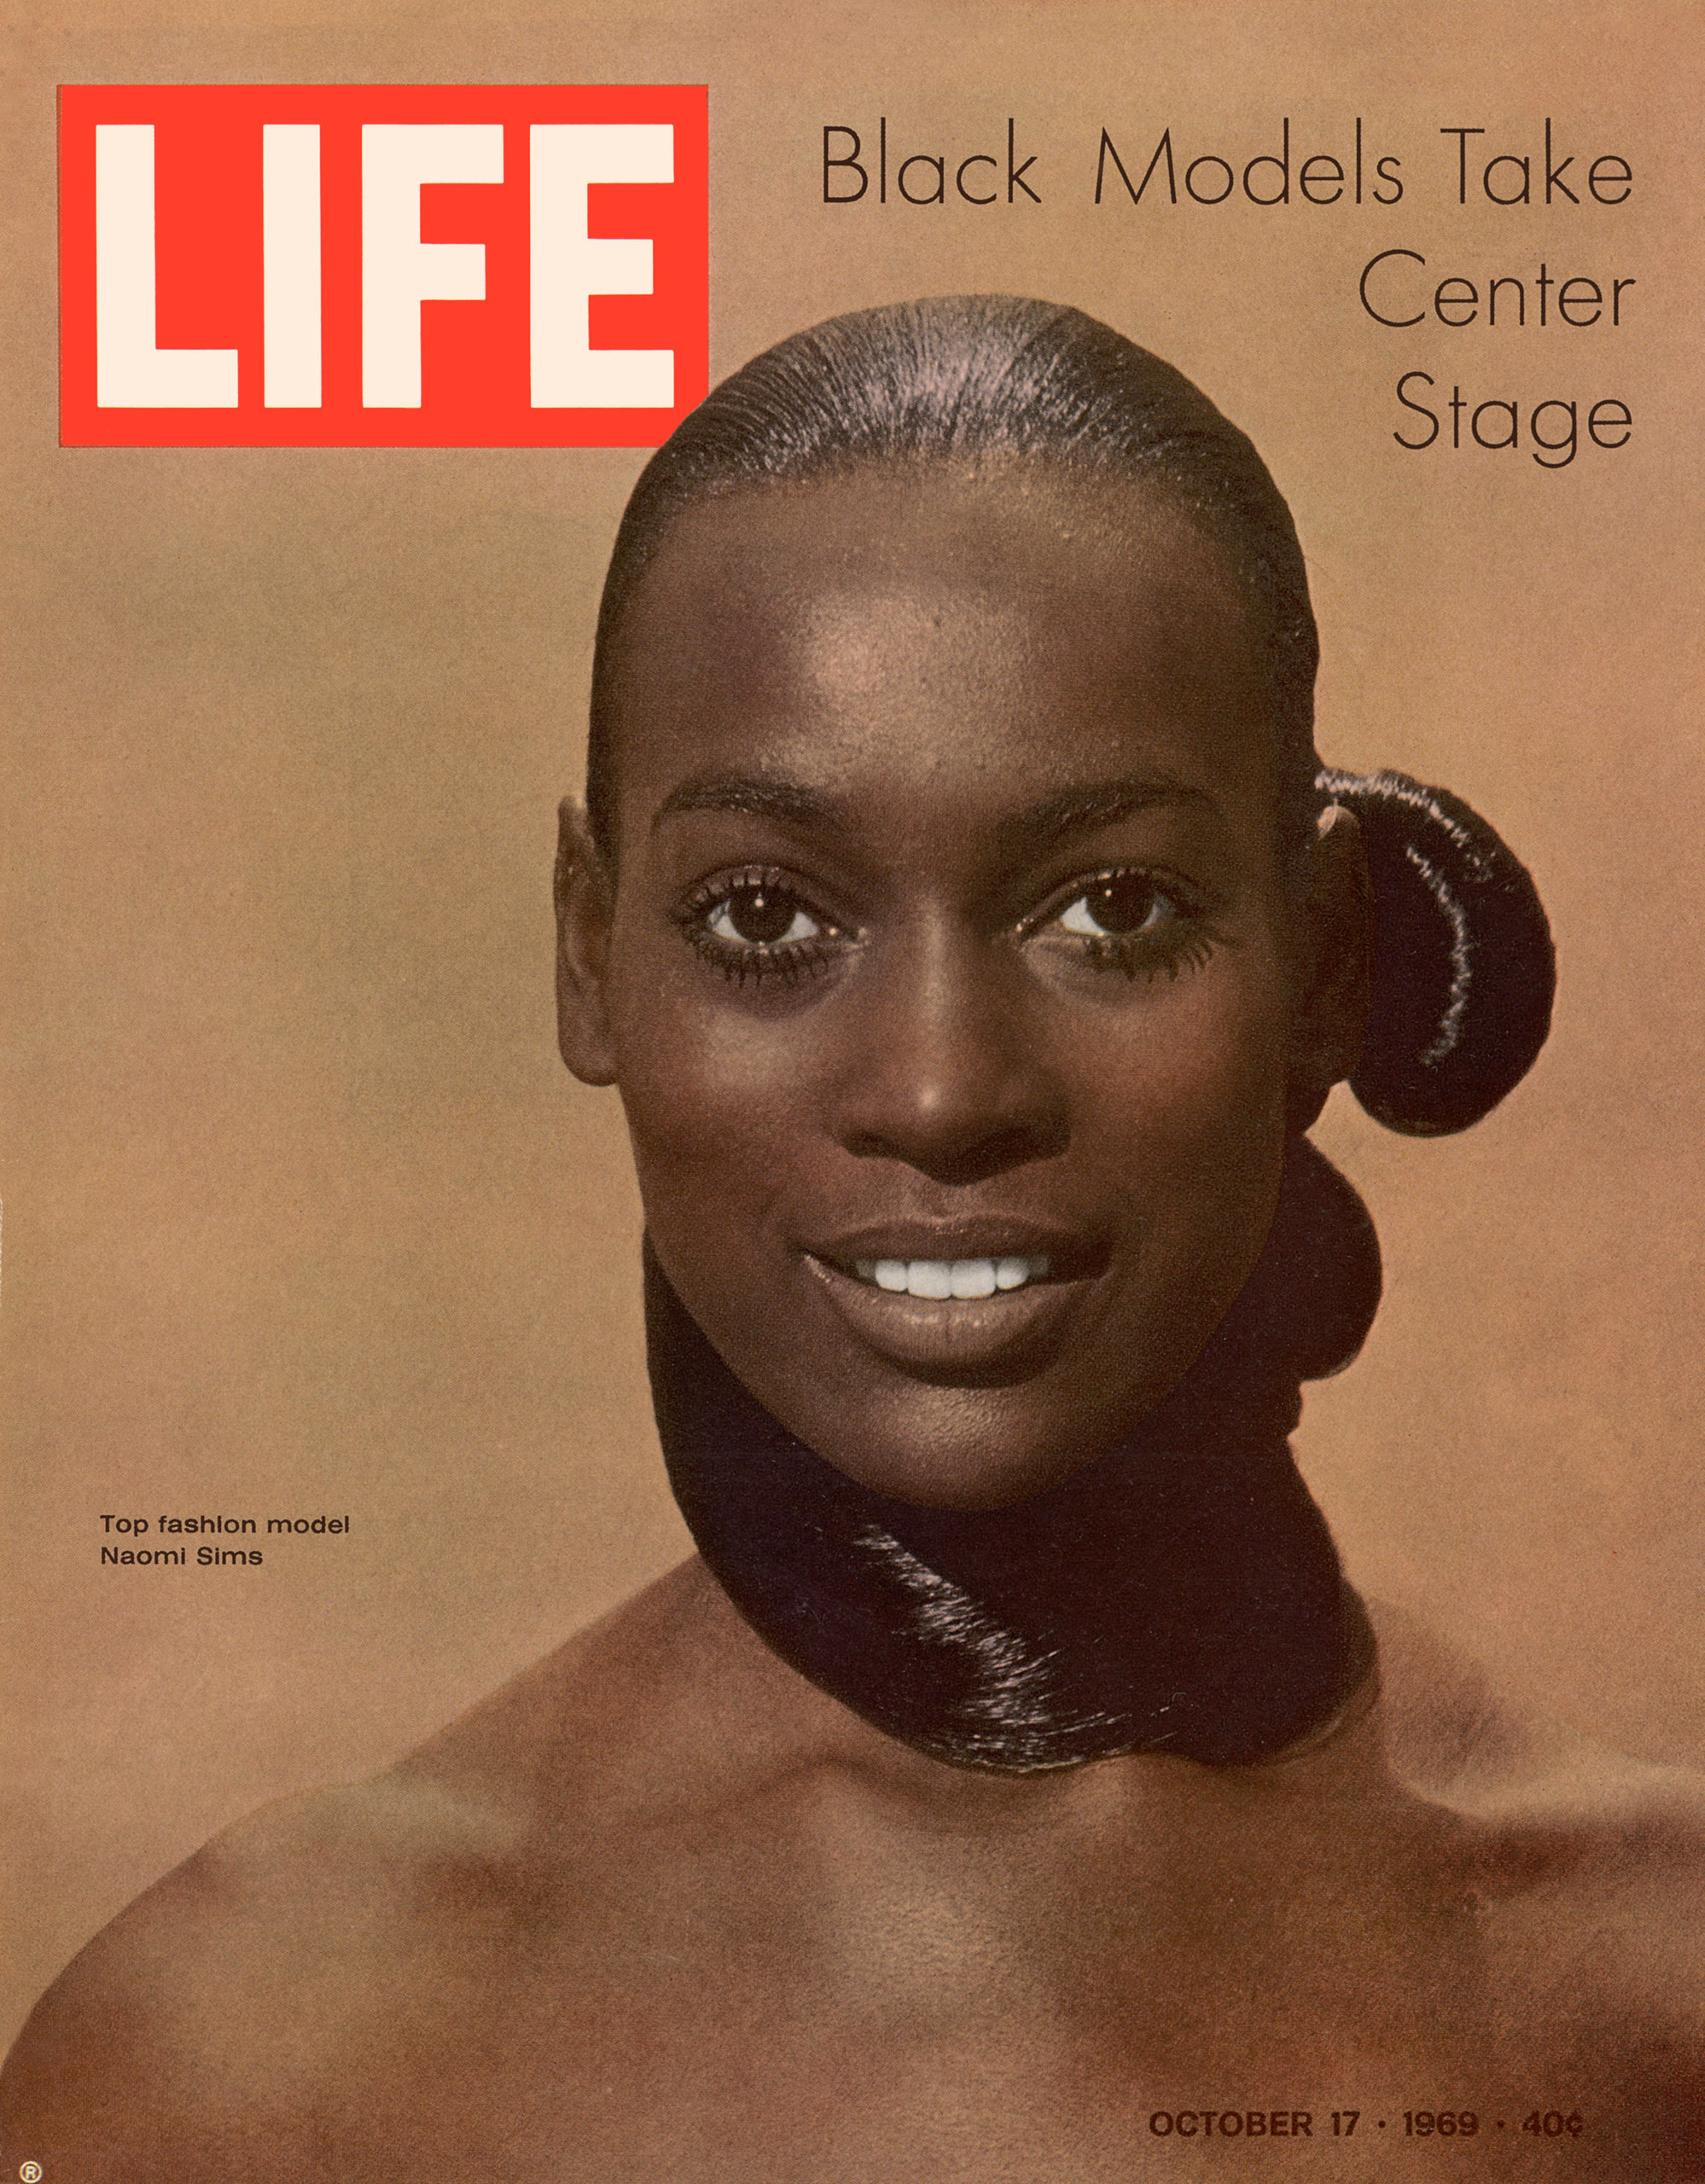 October 17, 1969 cover of LIFE magazine.